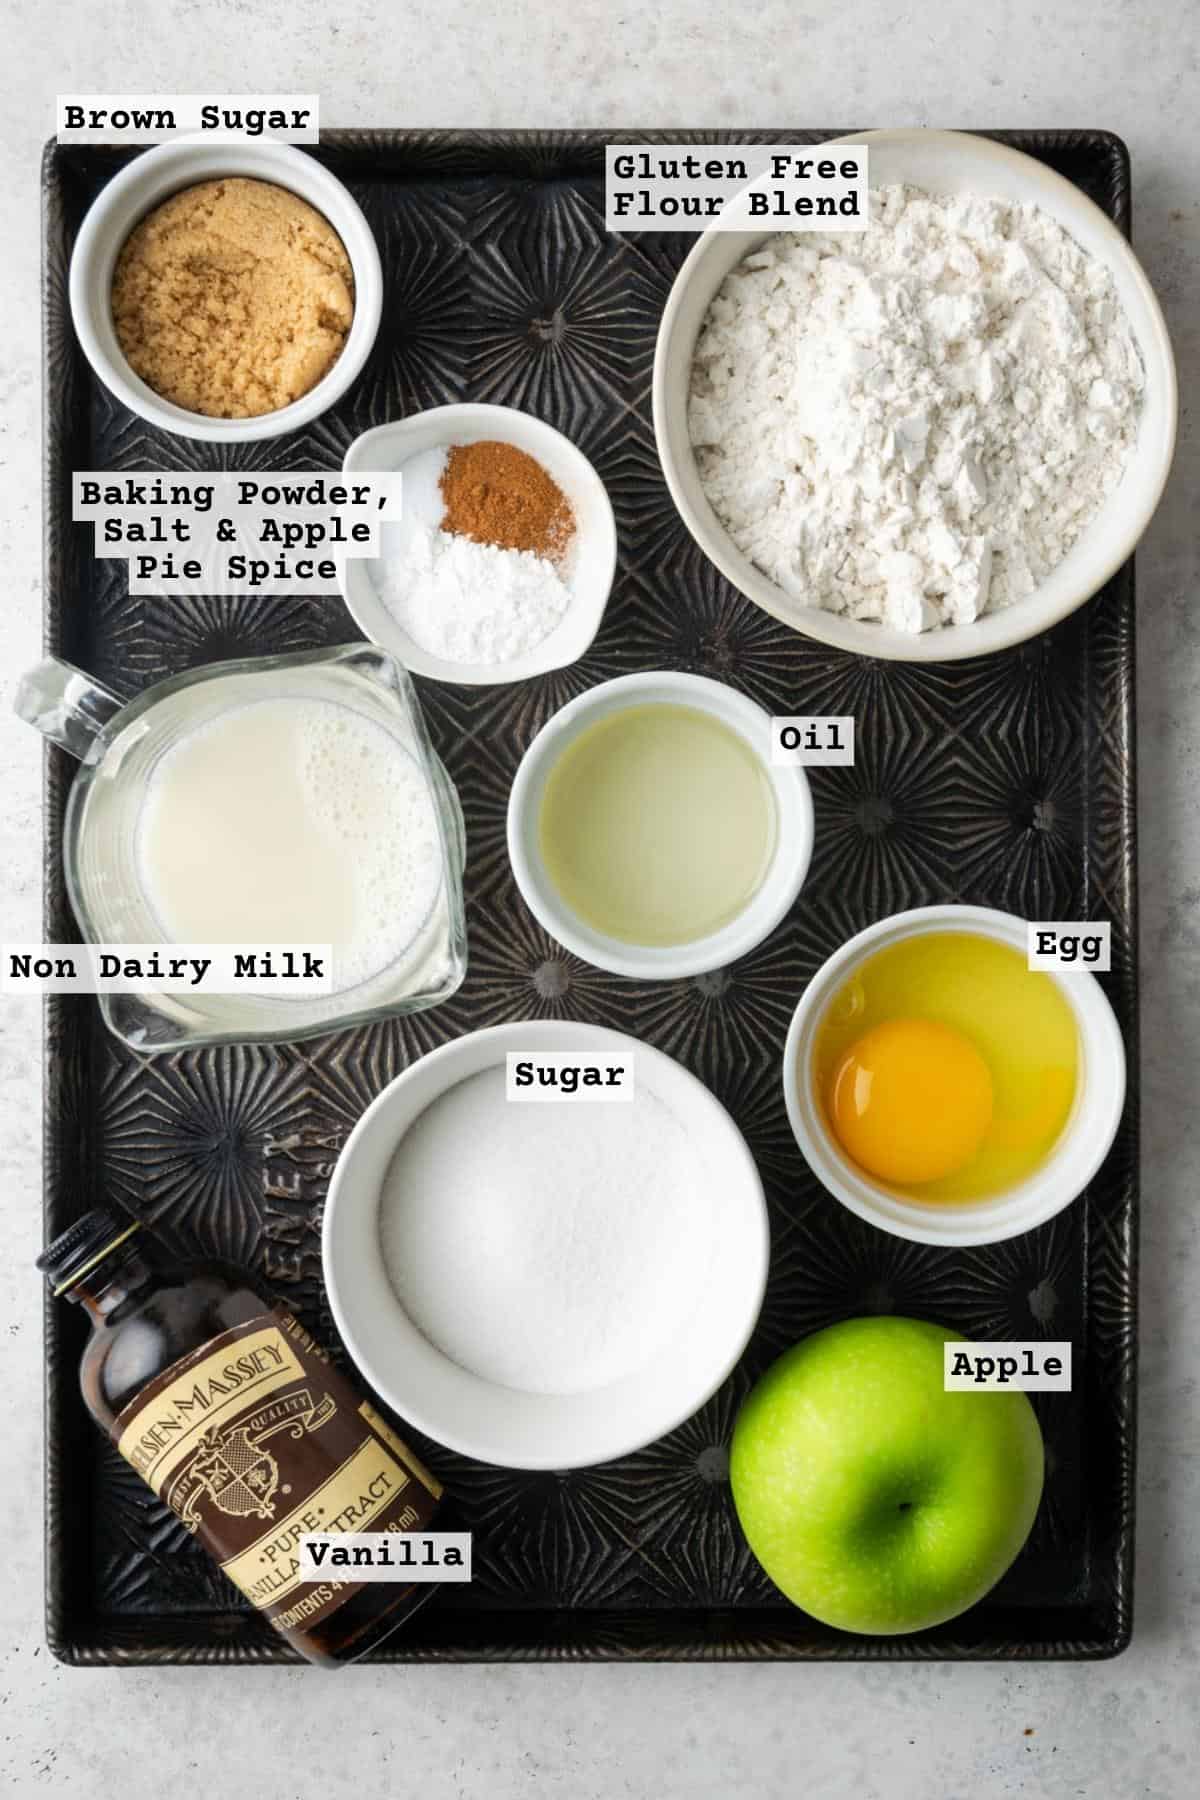 Ingredients for gluten free apple muffins on a metal baking tray.